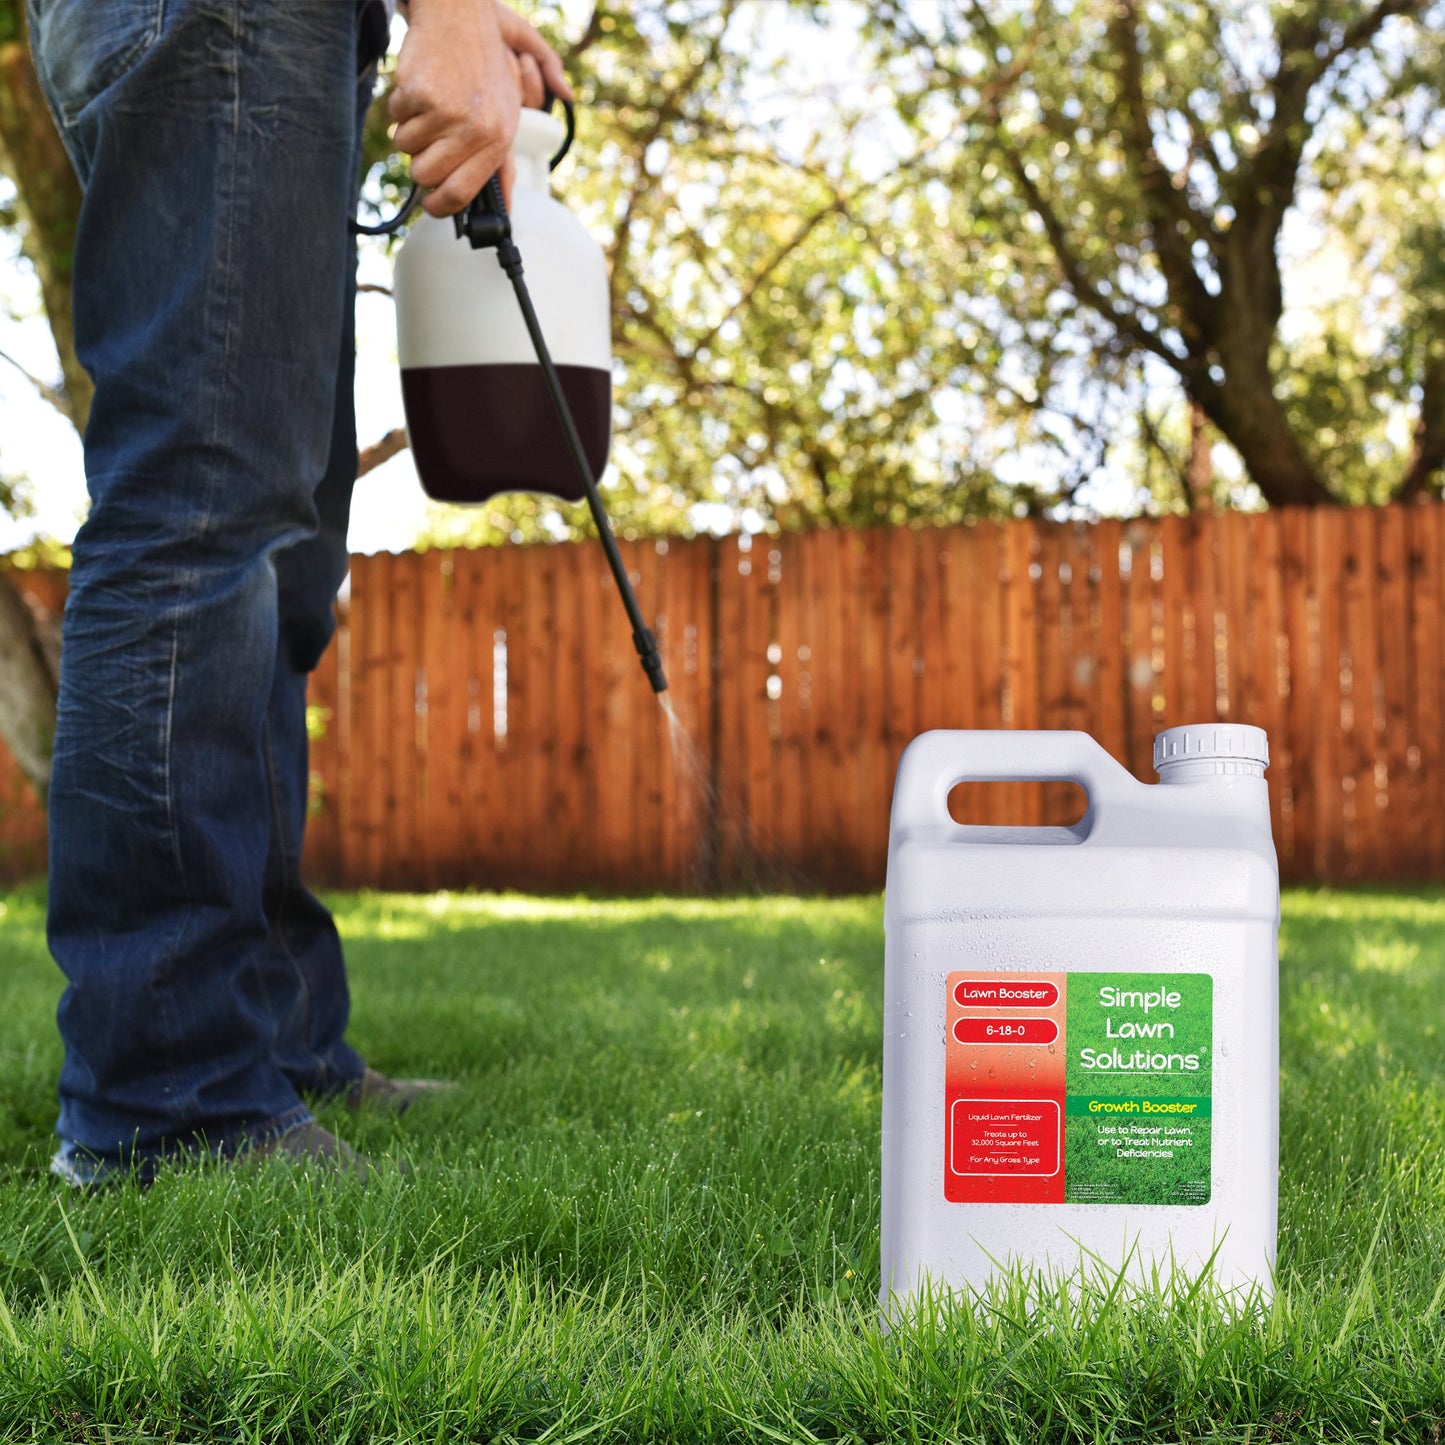 Lawn Booster: Extreme Growth Booster (2.5 Gallon)